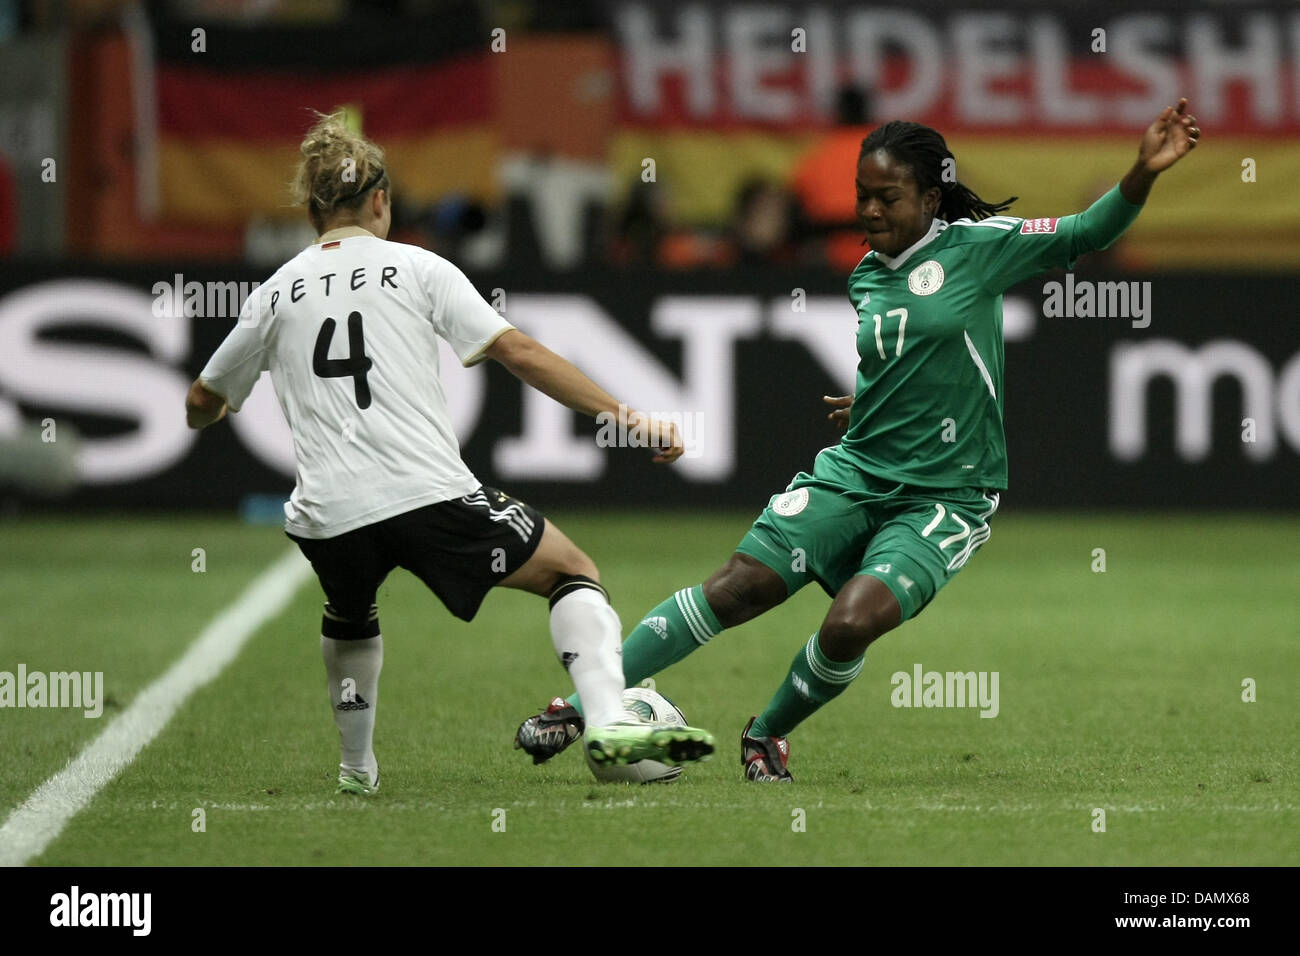 Babett Peter (l) of Germany and Francisca Ordega of Nigeria fight for the ball during the Group A match Germany against Nigeria of FIFA Women's World Cup soccer tournament at the FIFA Women's World Cup Stadium in Frankfurt, Germany, 30 June 2011. Foto: Fredrik von Erichsen dpa/lhe Stock Photo